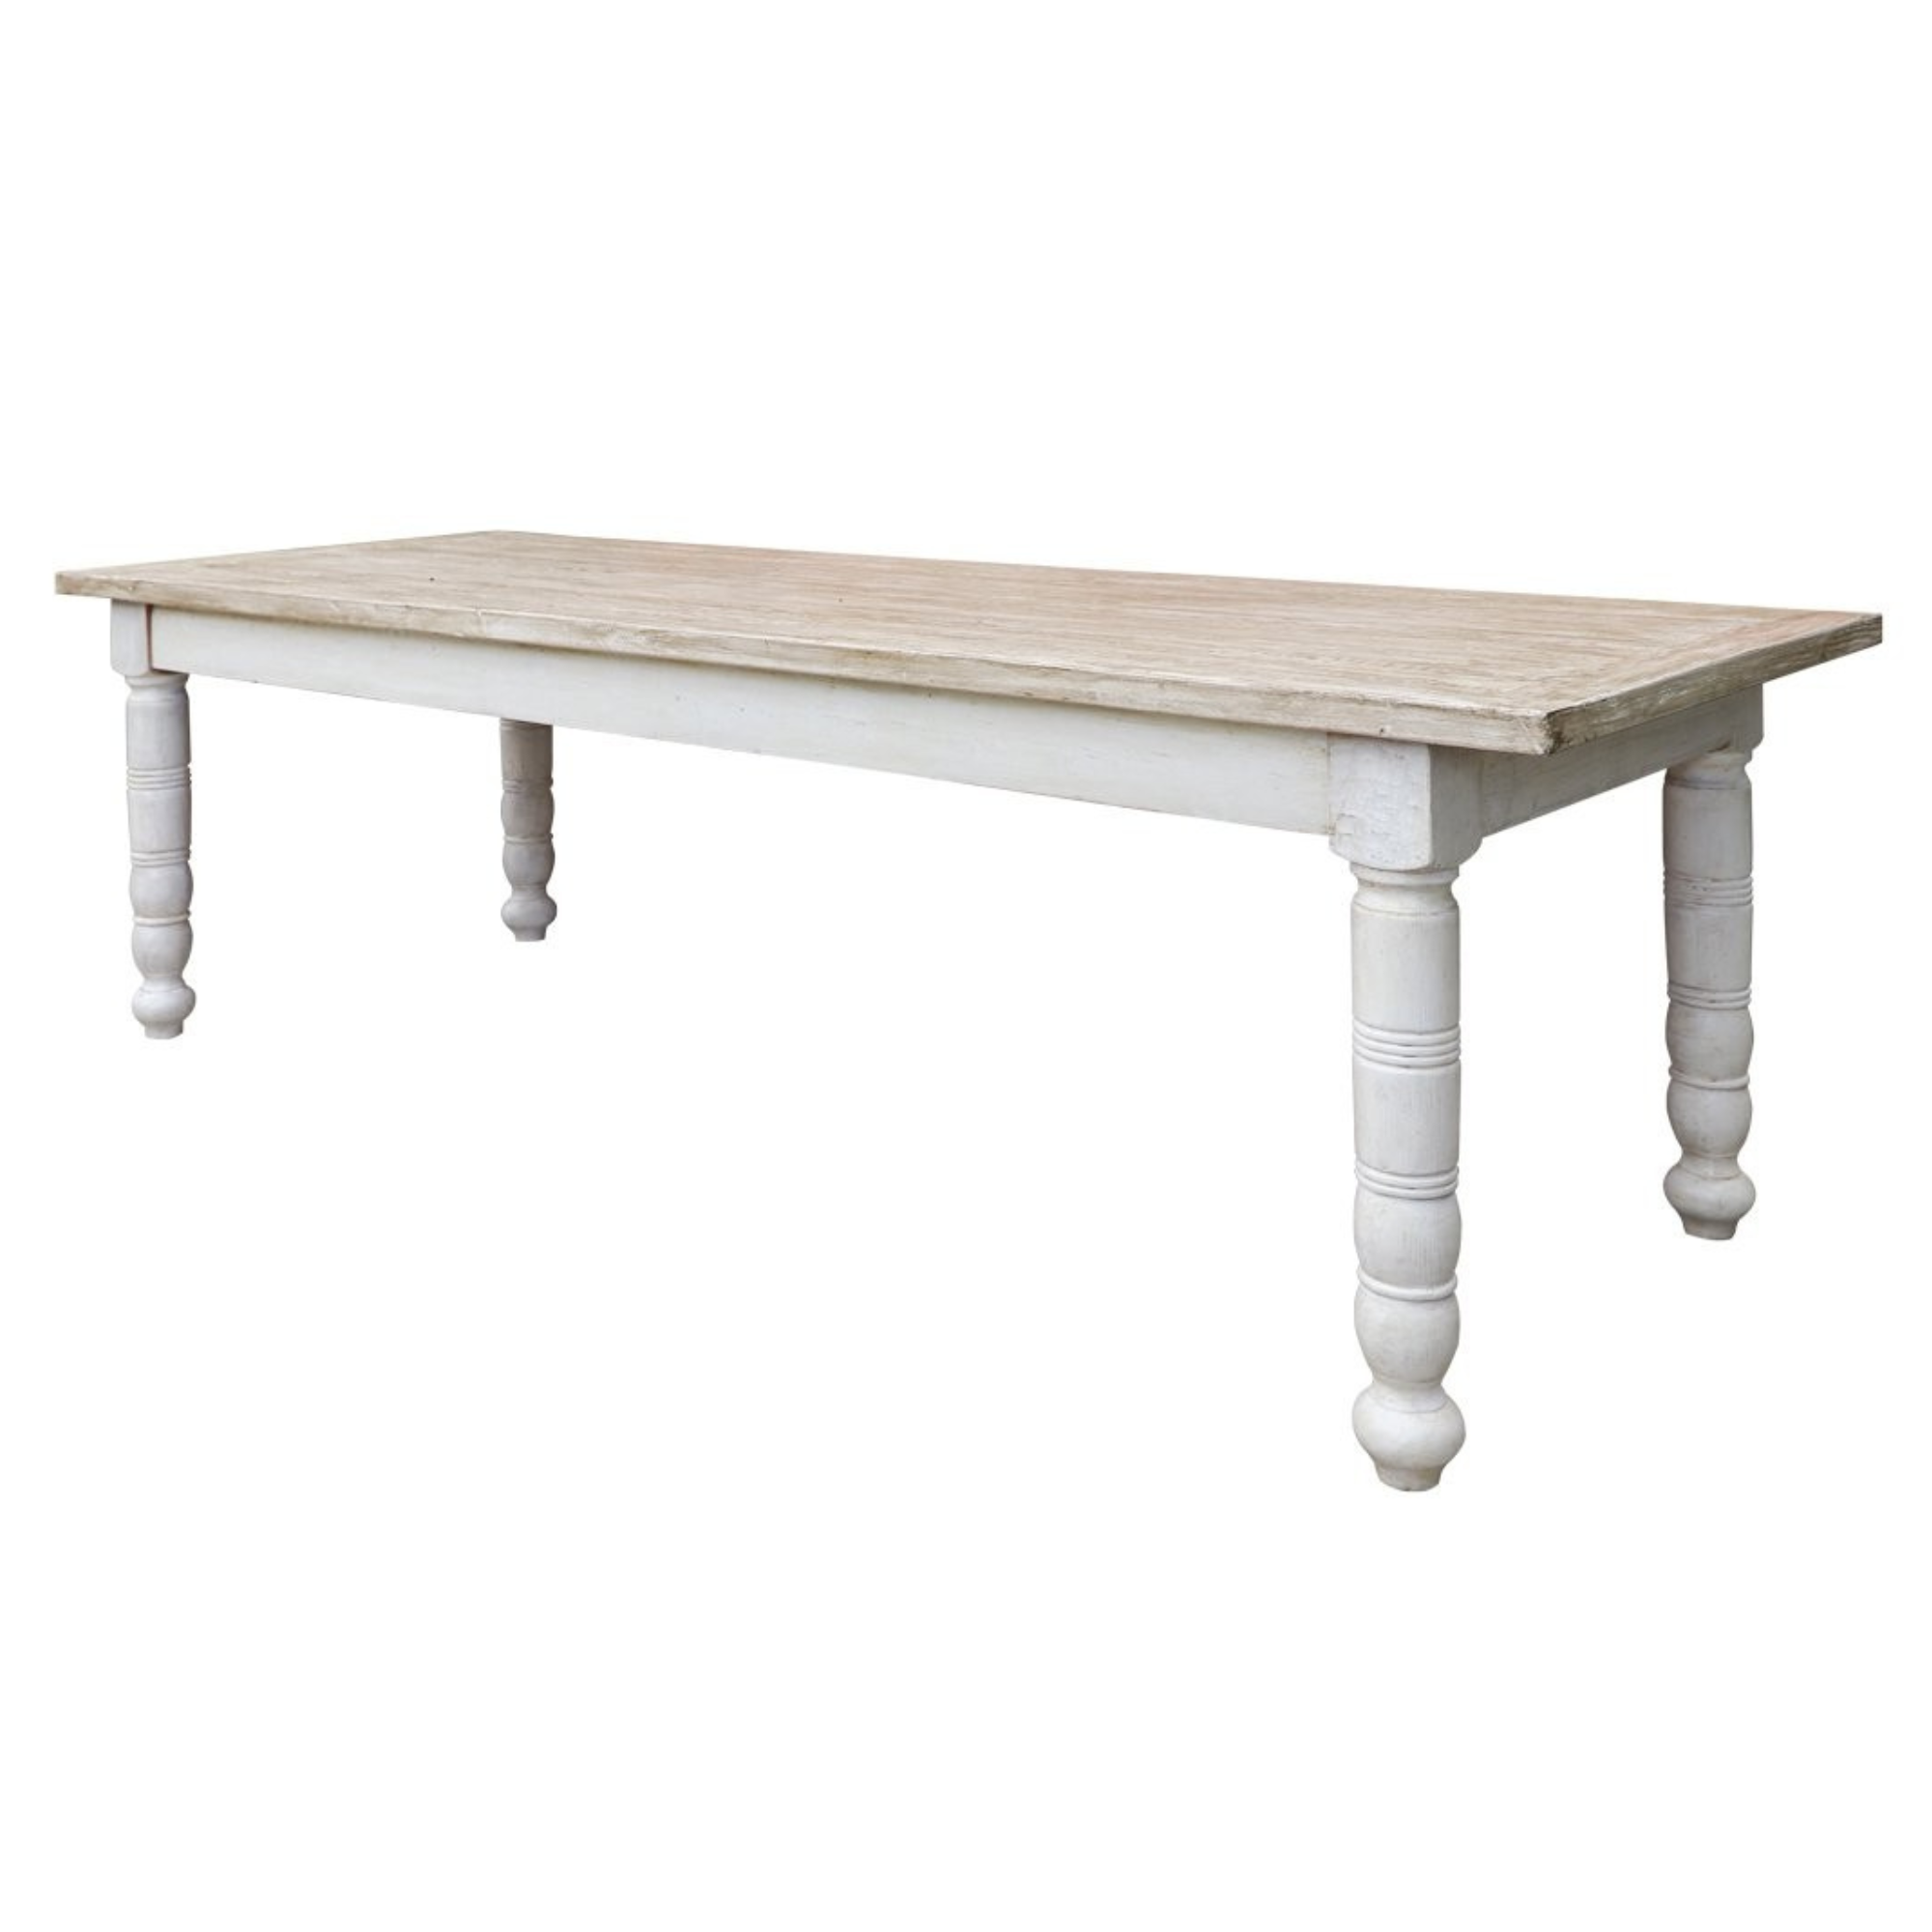 LIMITED EDITION RECLAIMED DINING TABLE